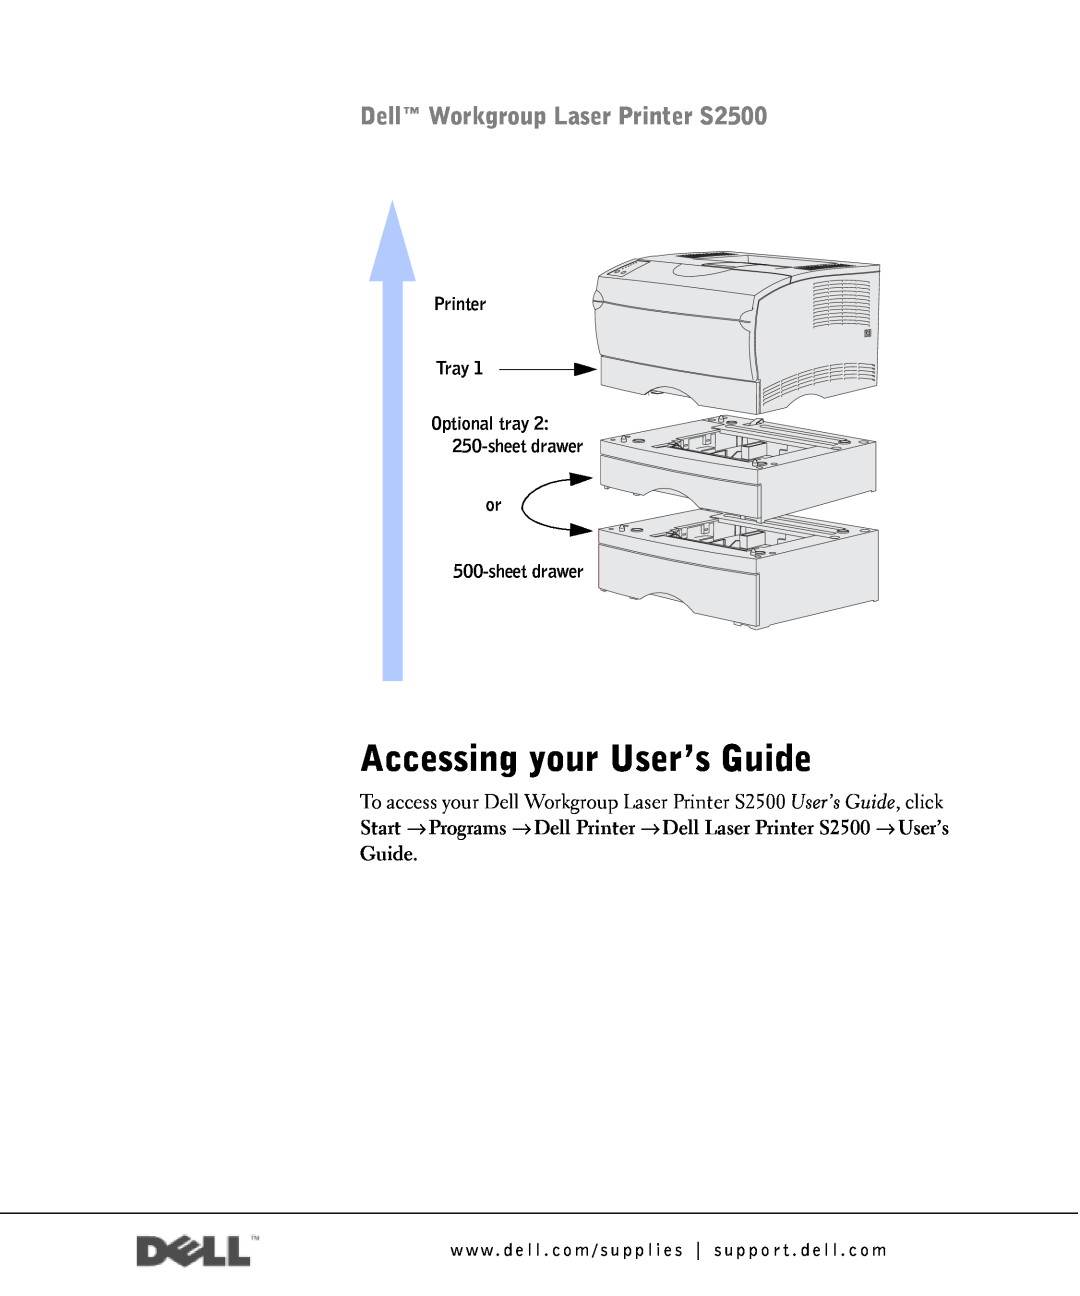 Dell owner manual Accessing your User’s Guide, Dell Workgroup Laser Printer S2500, Printer Tray, or 500-sheet drawer 